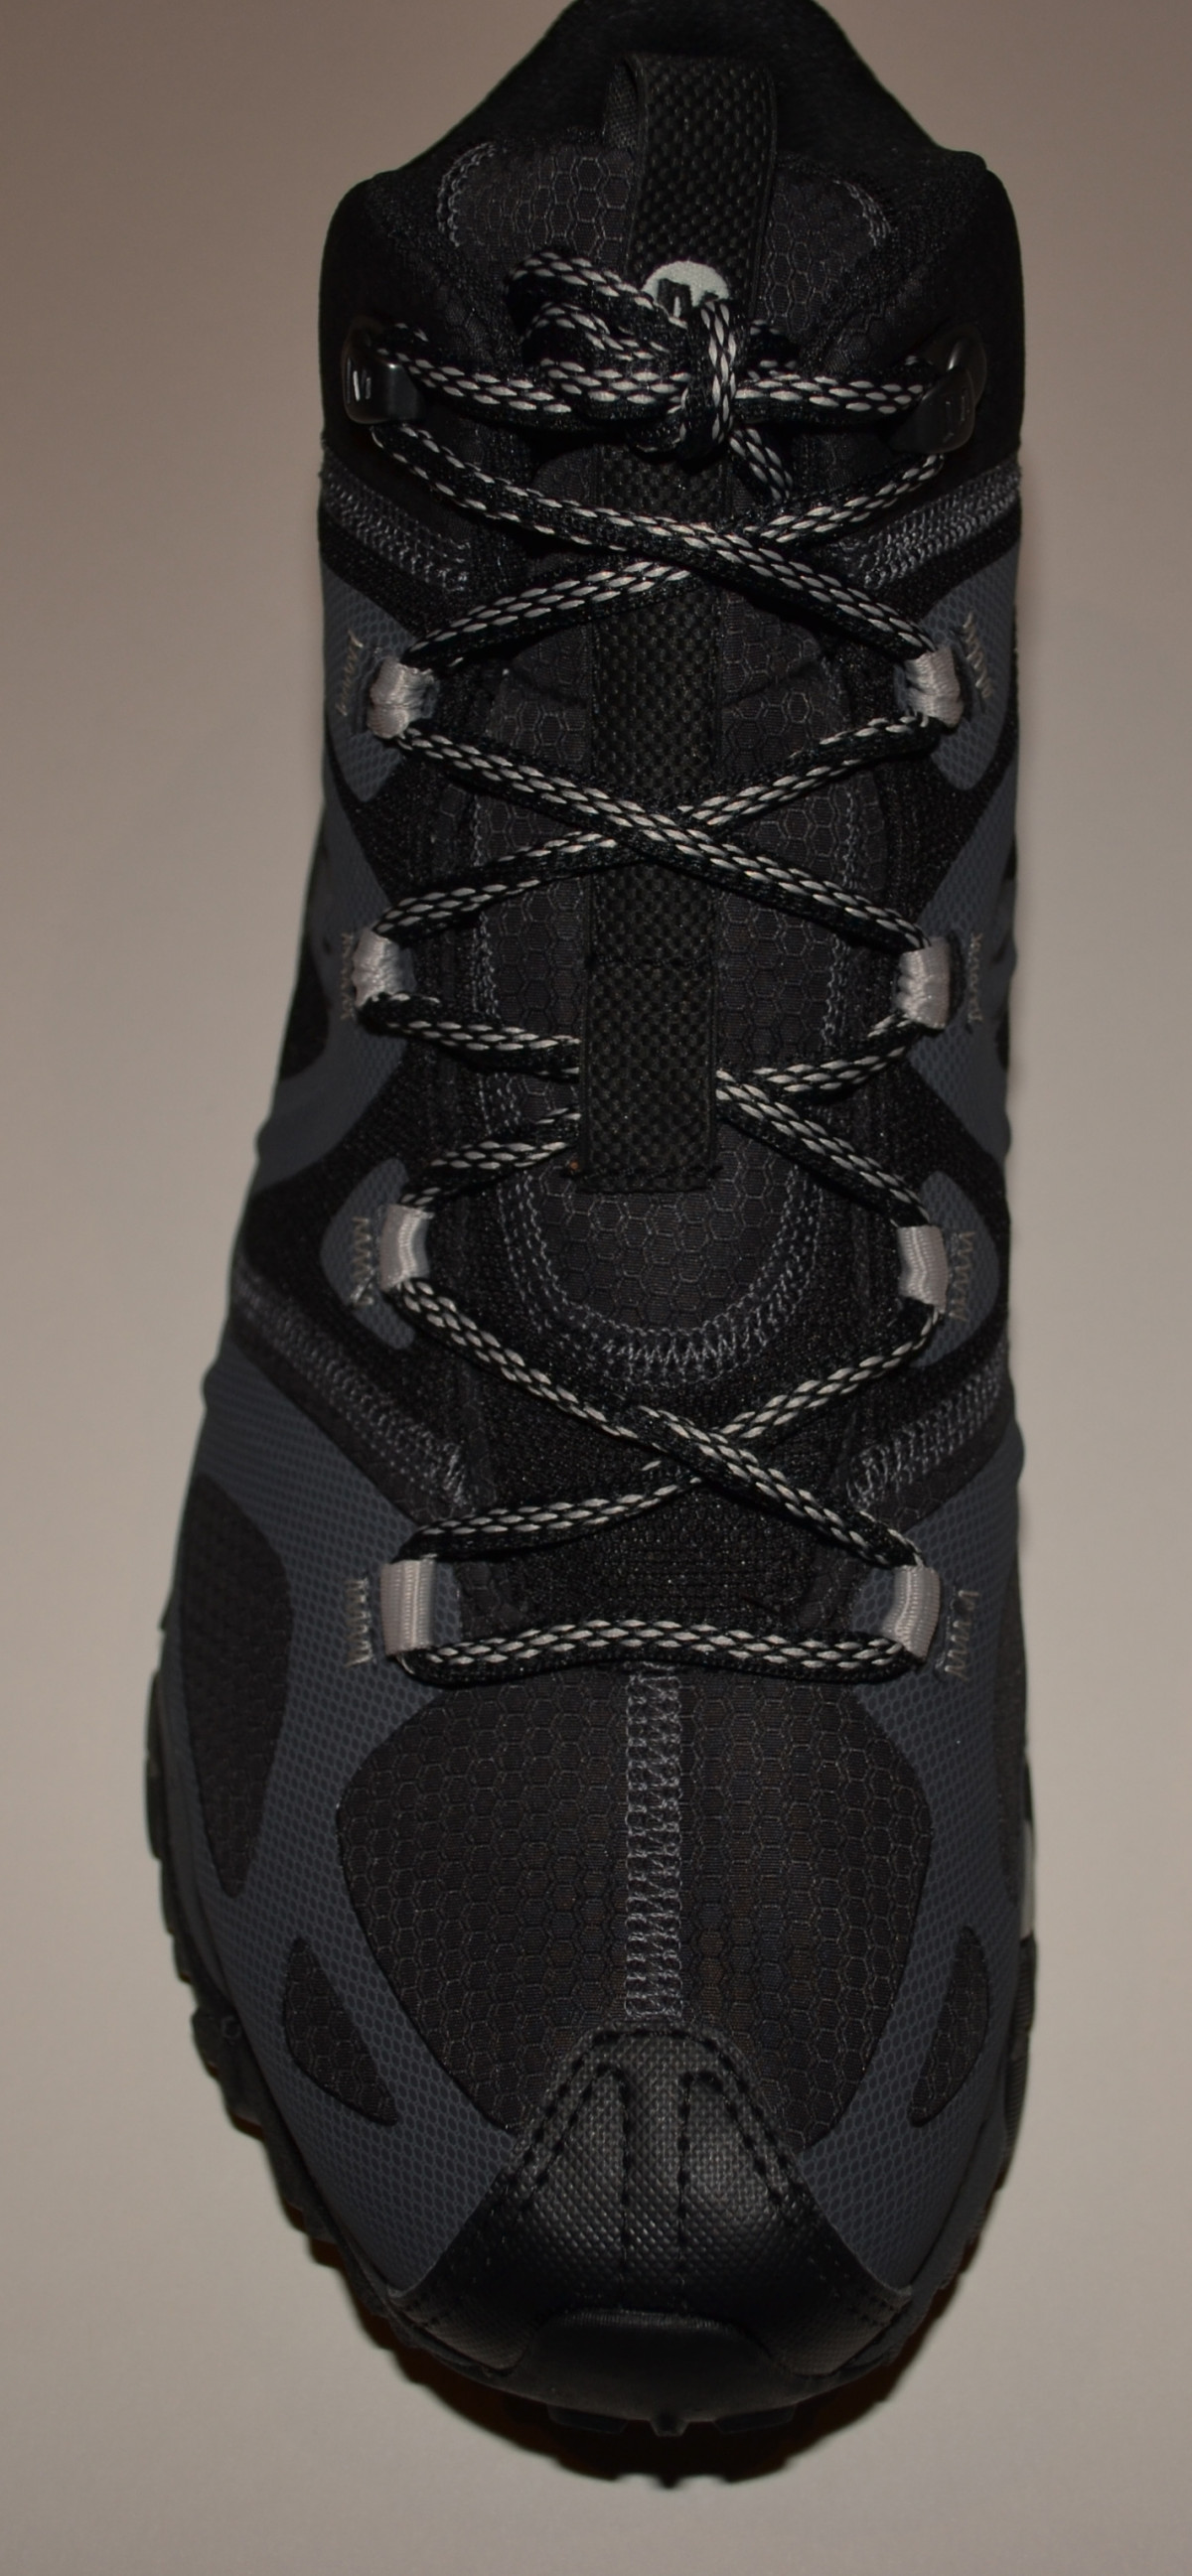 Sturdy fabric around the eyelets, with a breathable mesh elsewhere